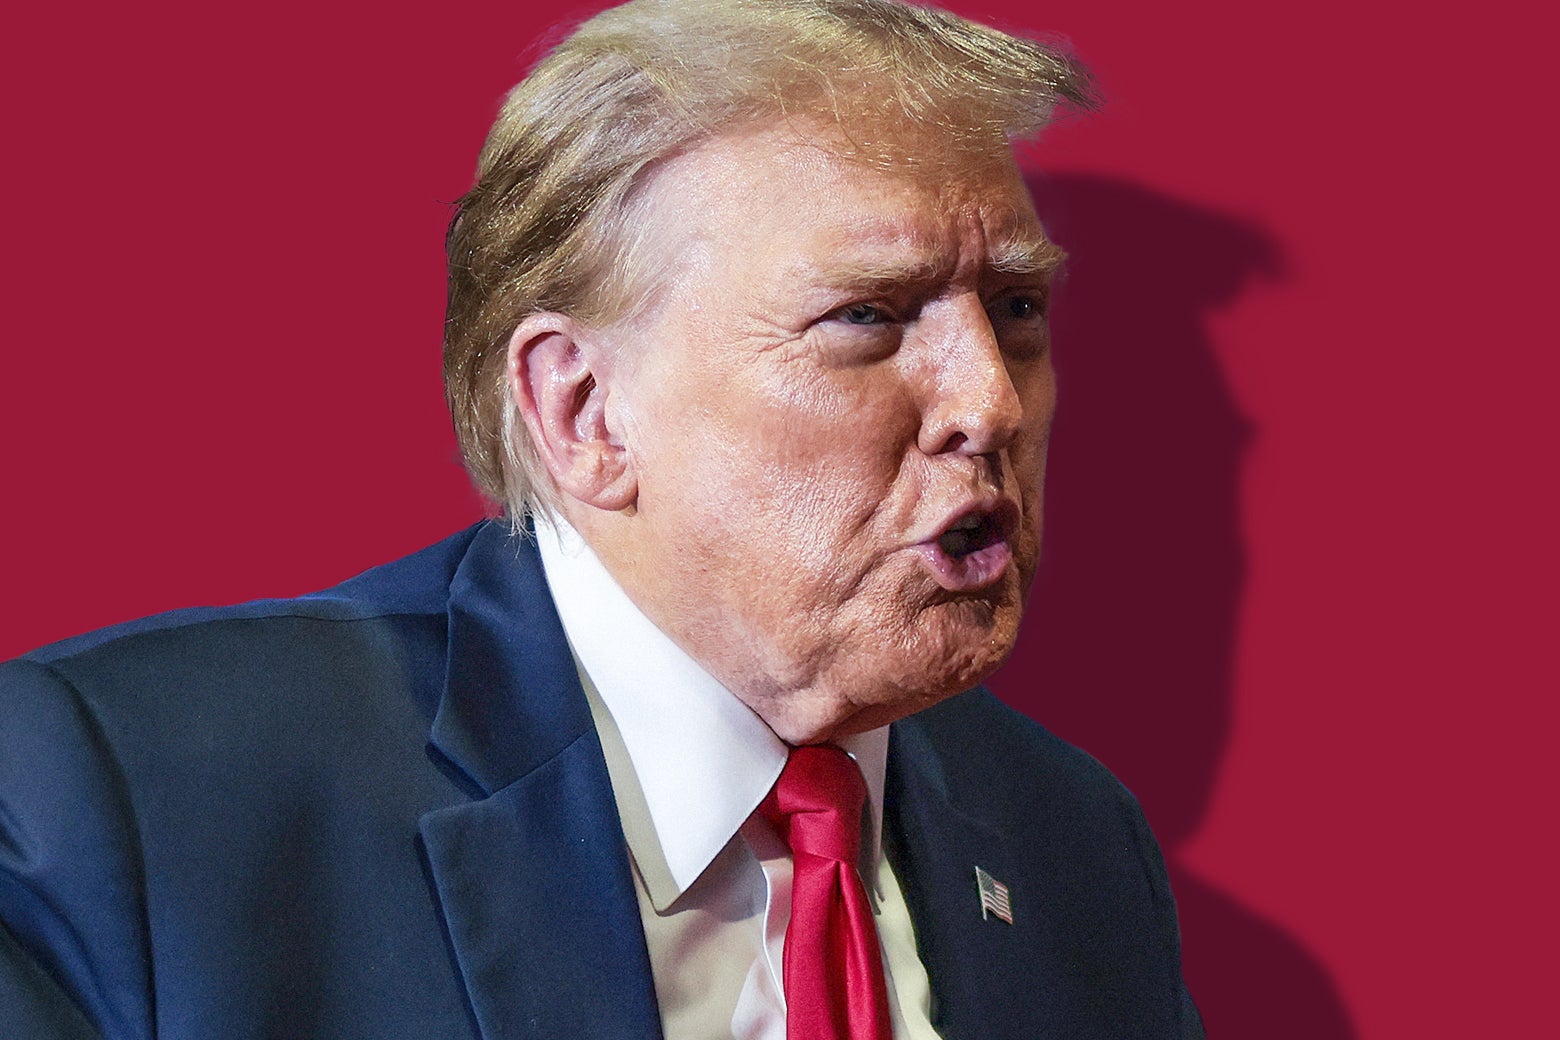 Donald Trump against a solid red background, casting a dark shadow.